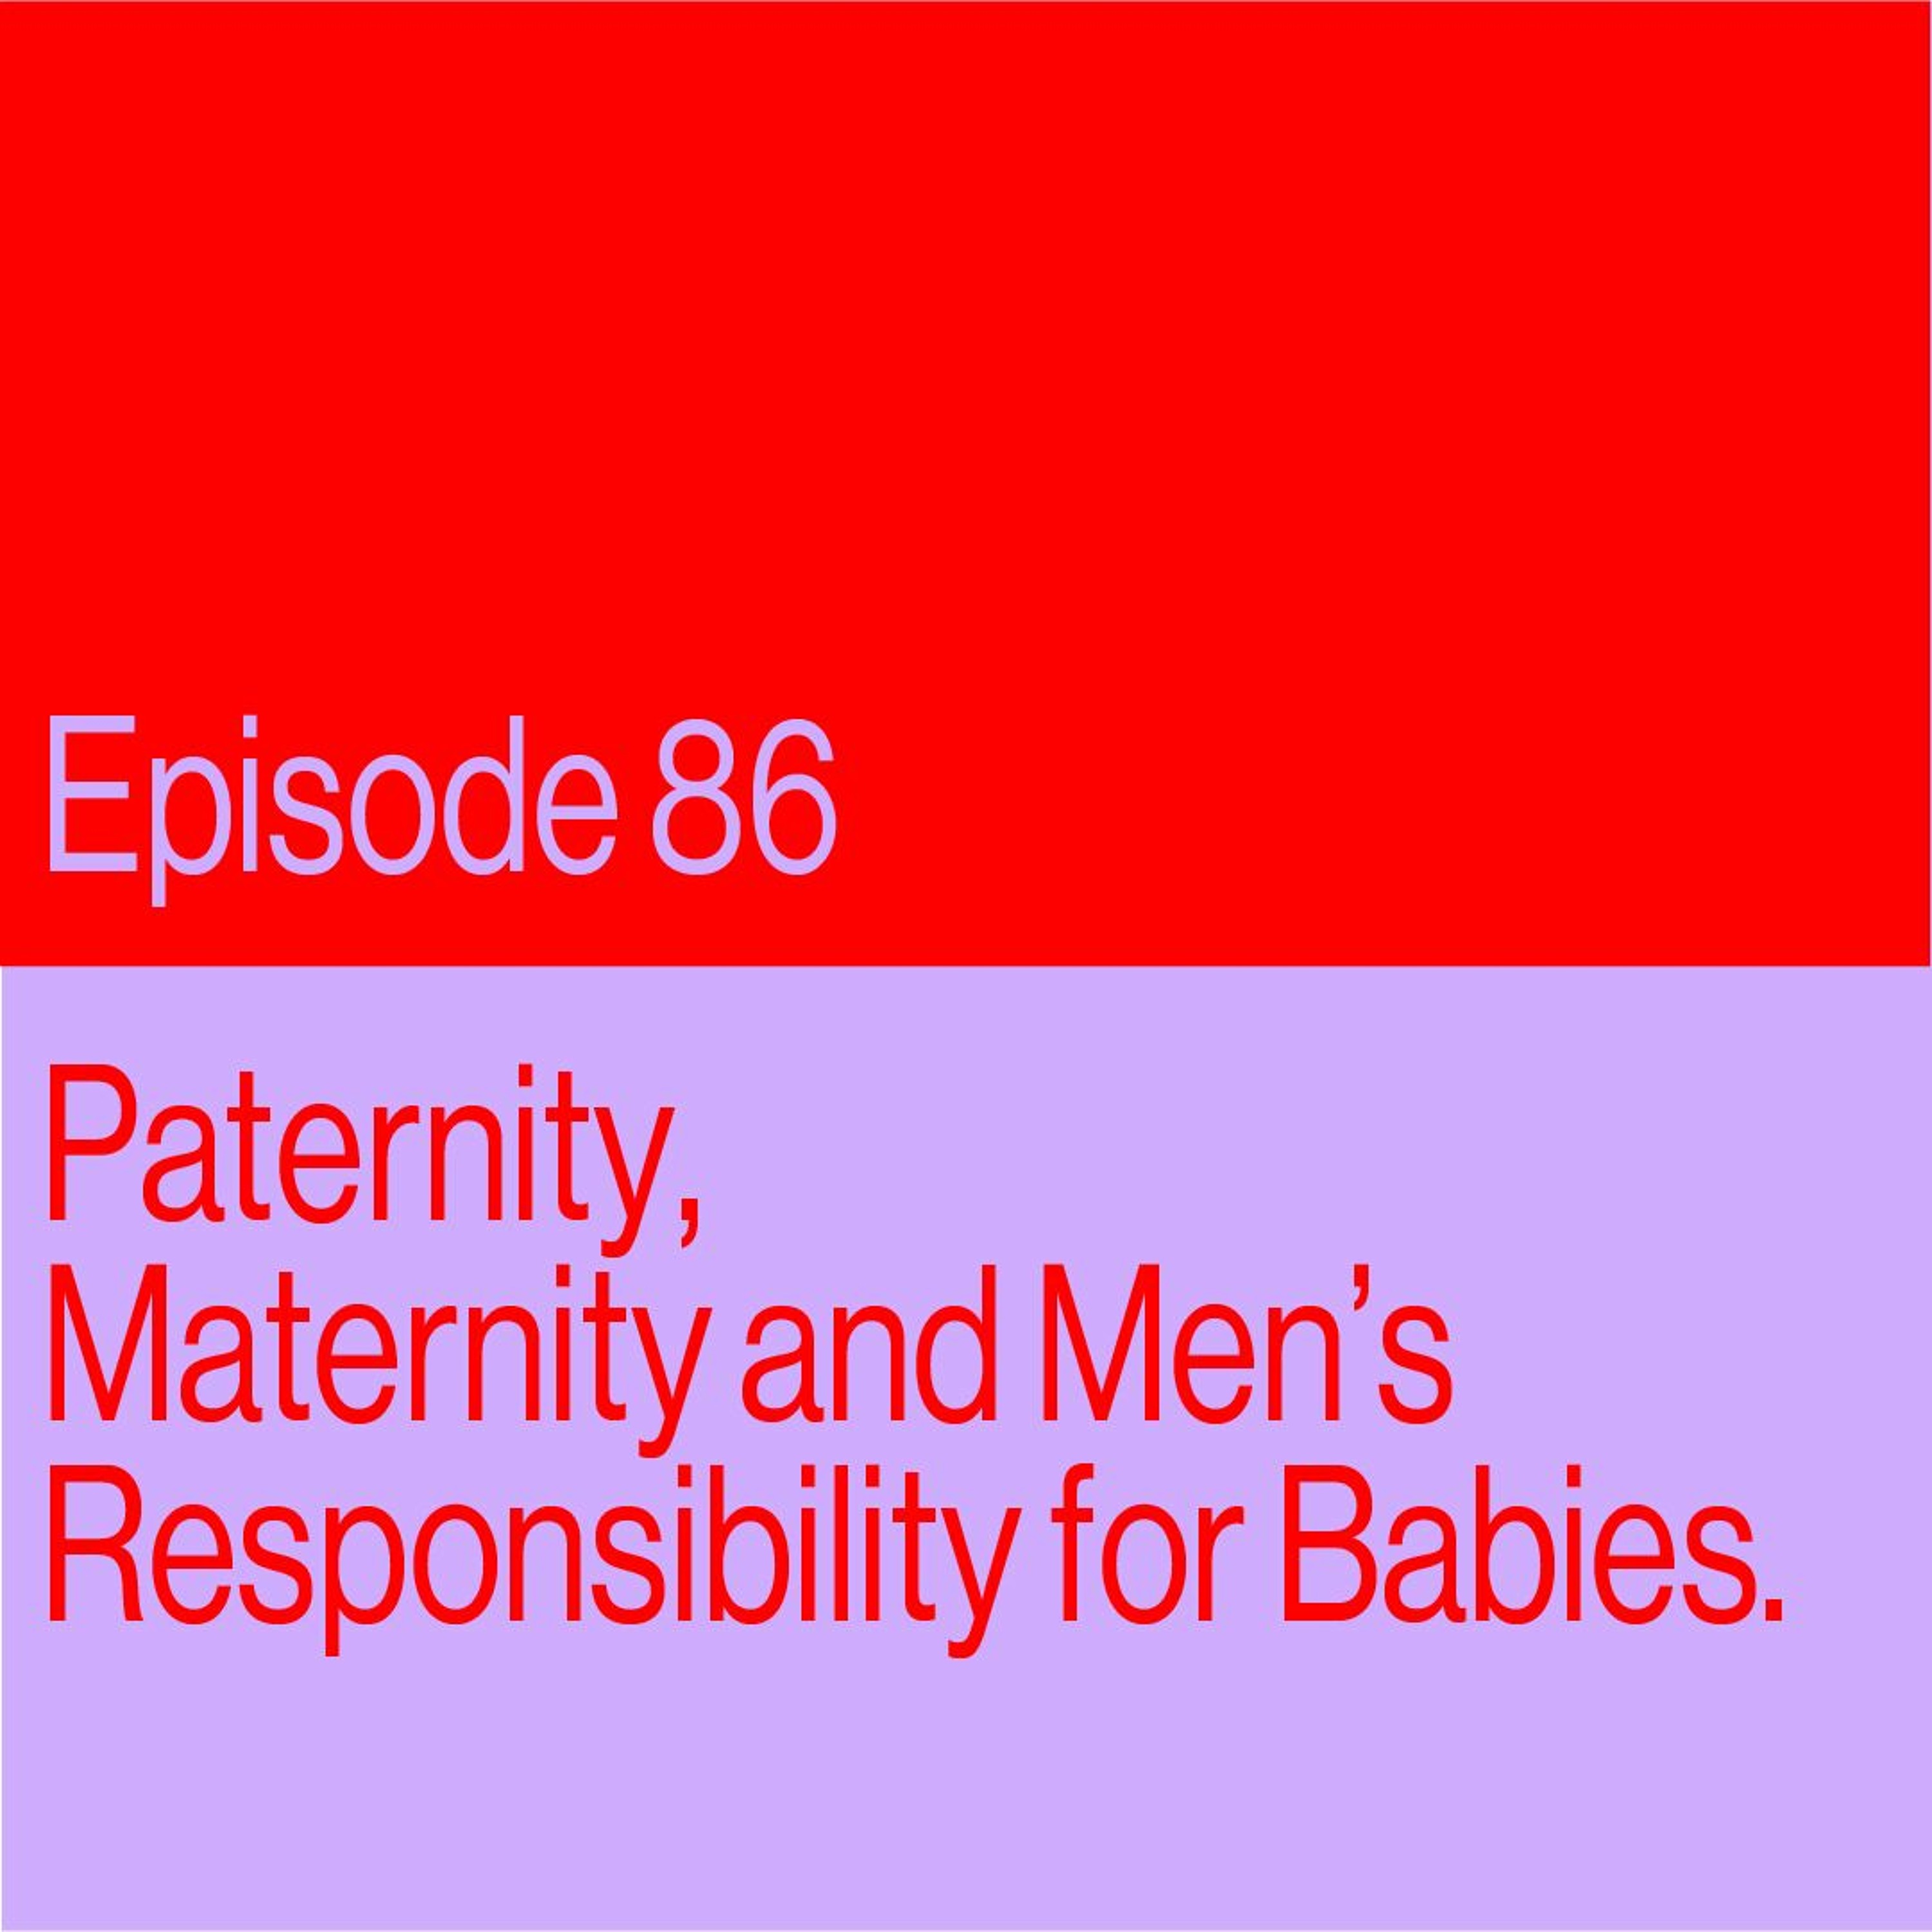 Episode 86: Paternity, Maternity And Men’s Responsibility For Babies